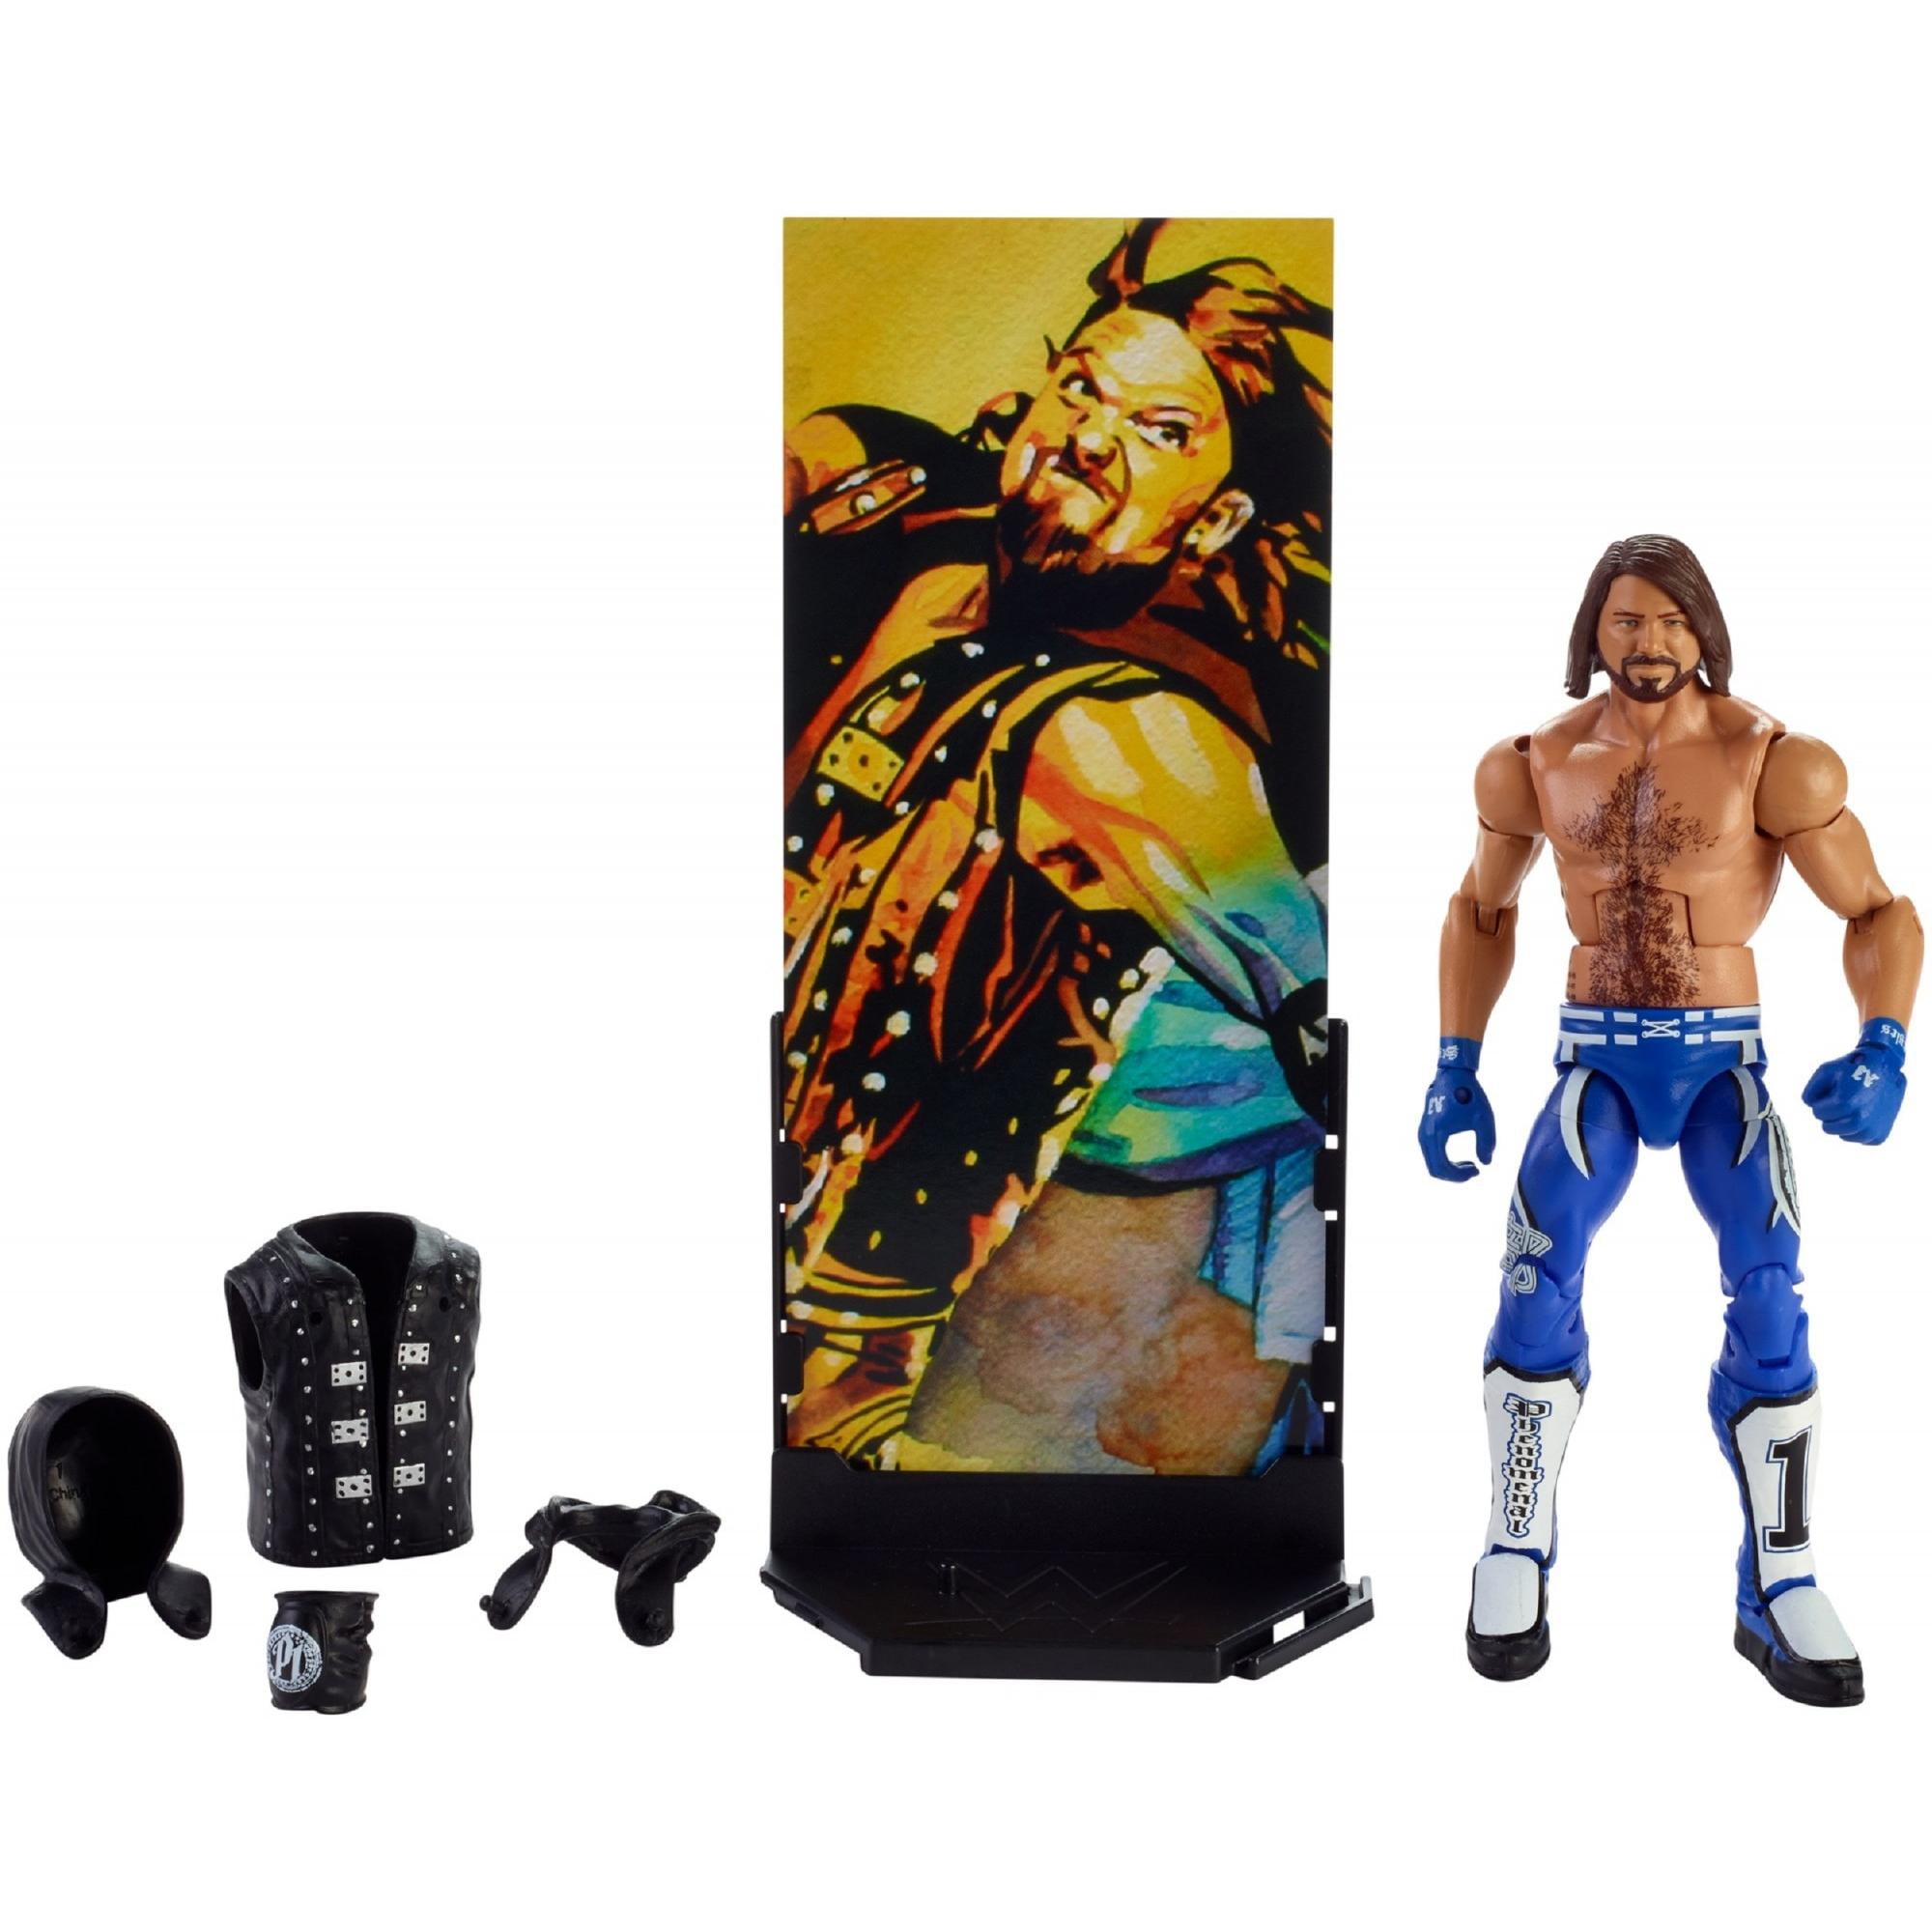 WWE AJ Styles Wrestling Action Figures WWE Elite Collection Series 56 New In Box 